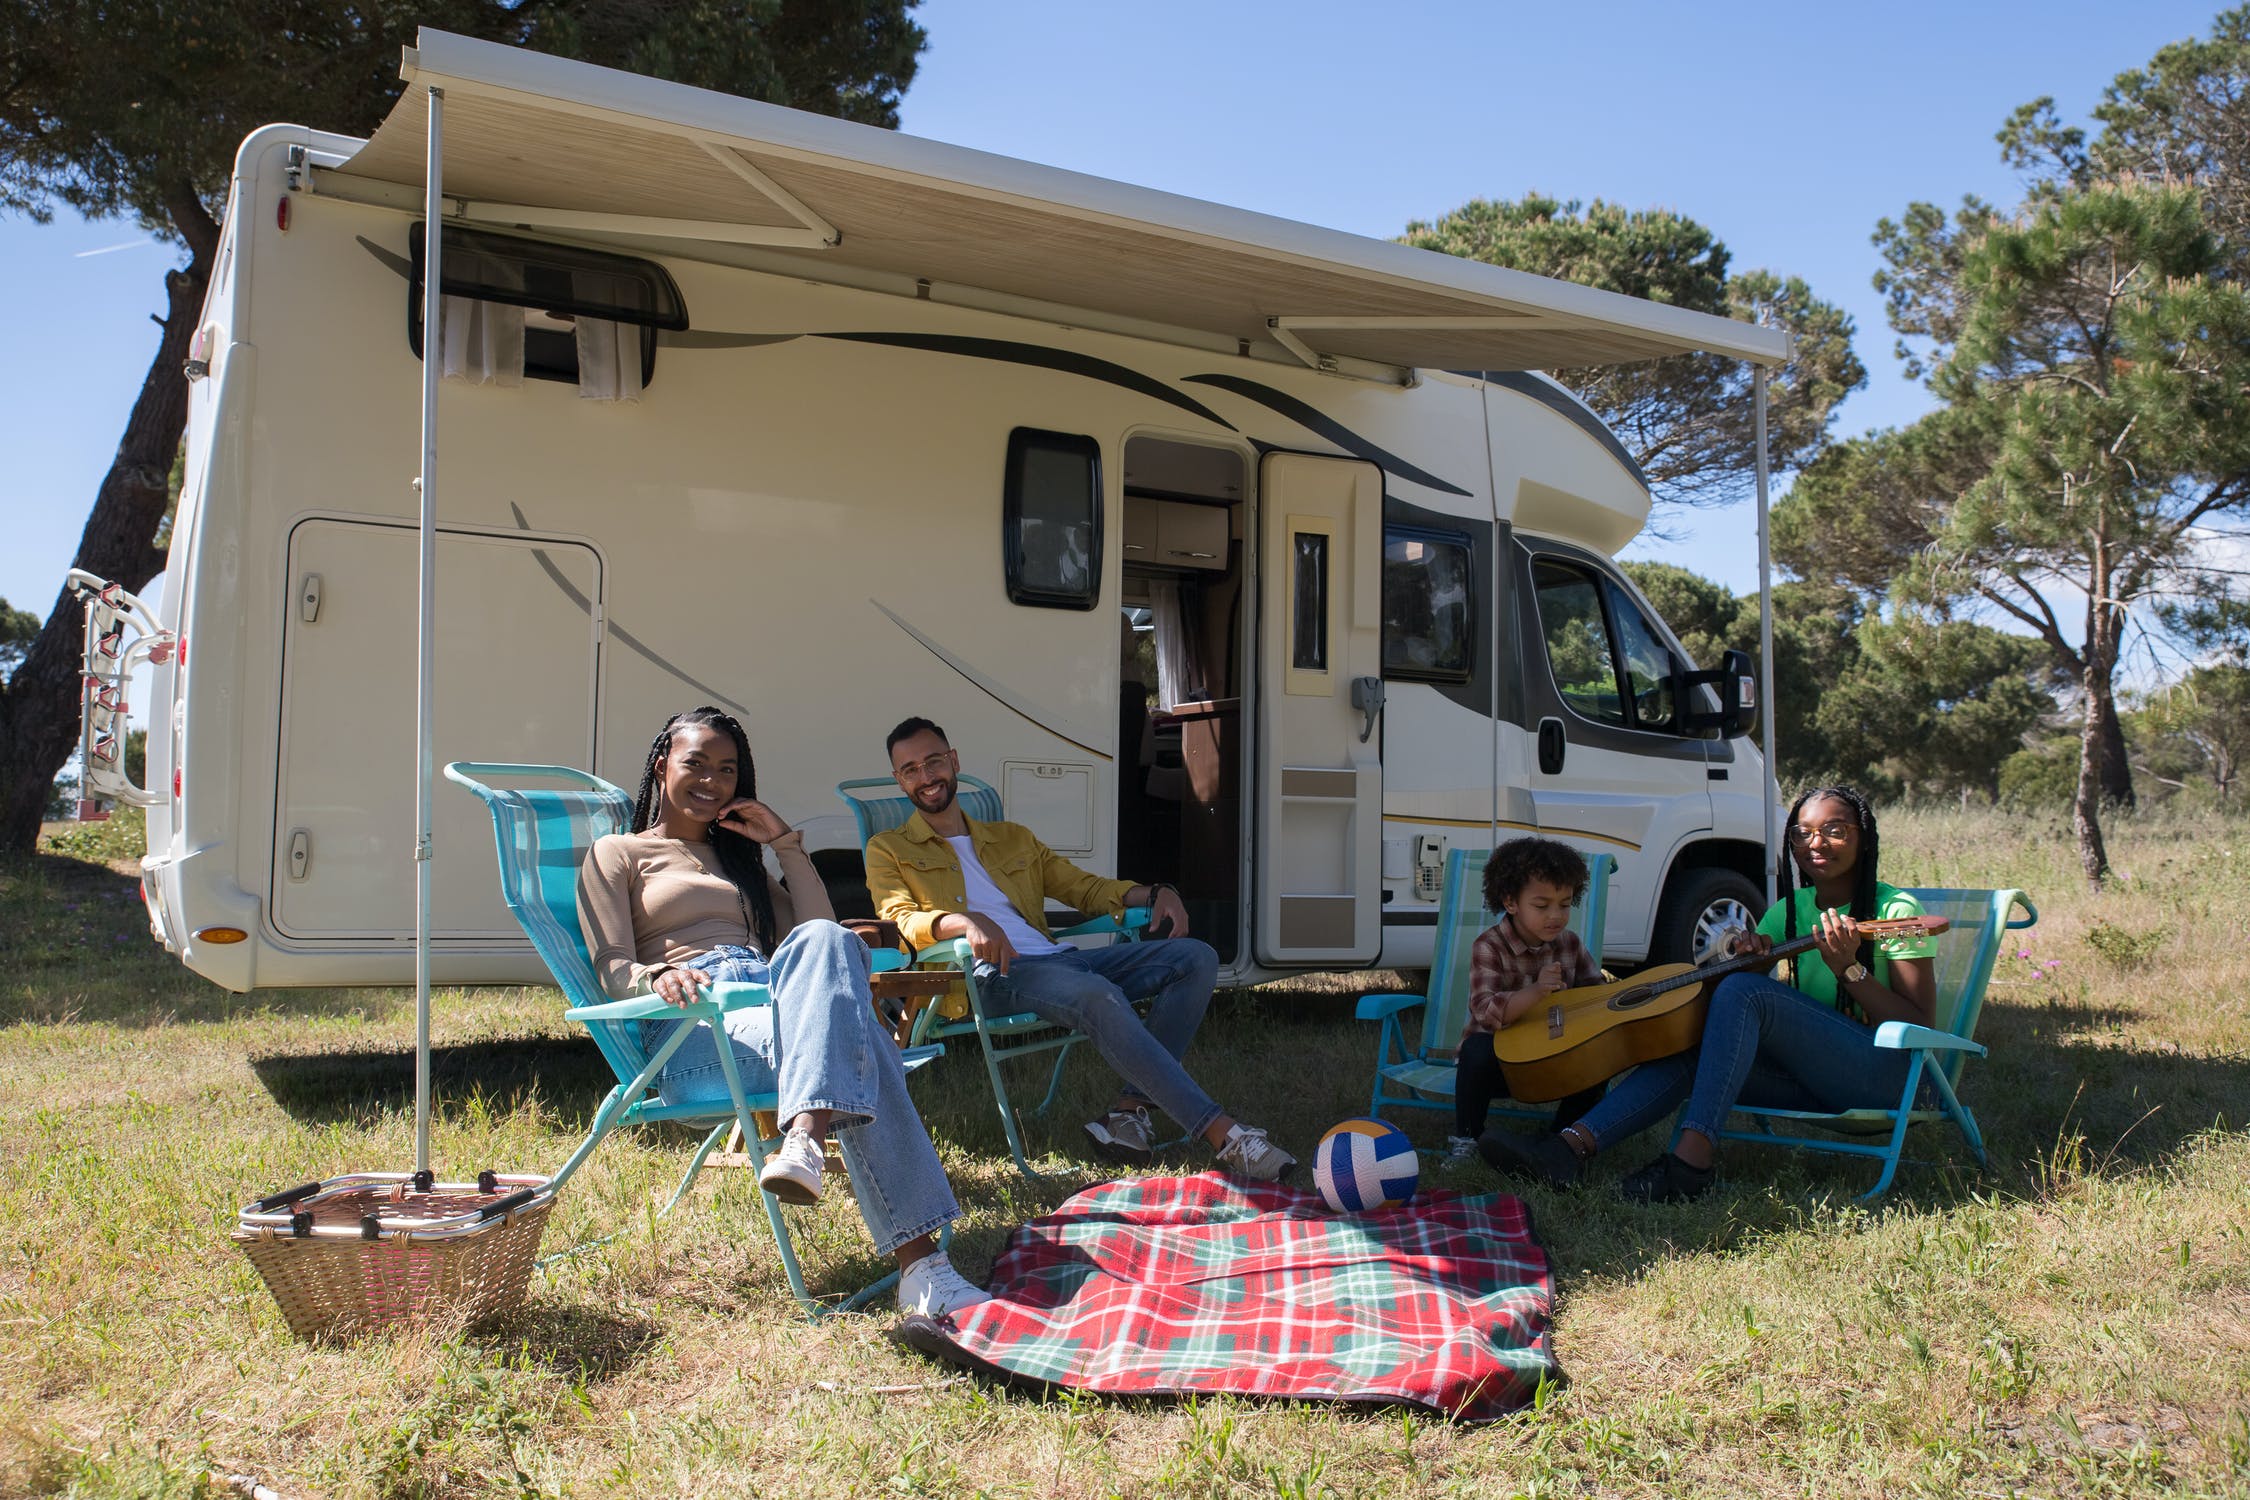 Strong demand for motorhomes and campervans as customers look to staycation